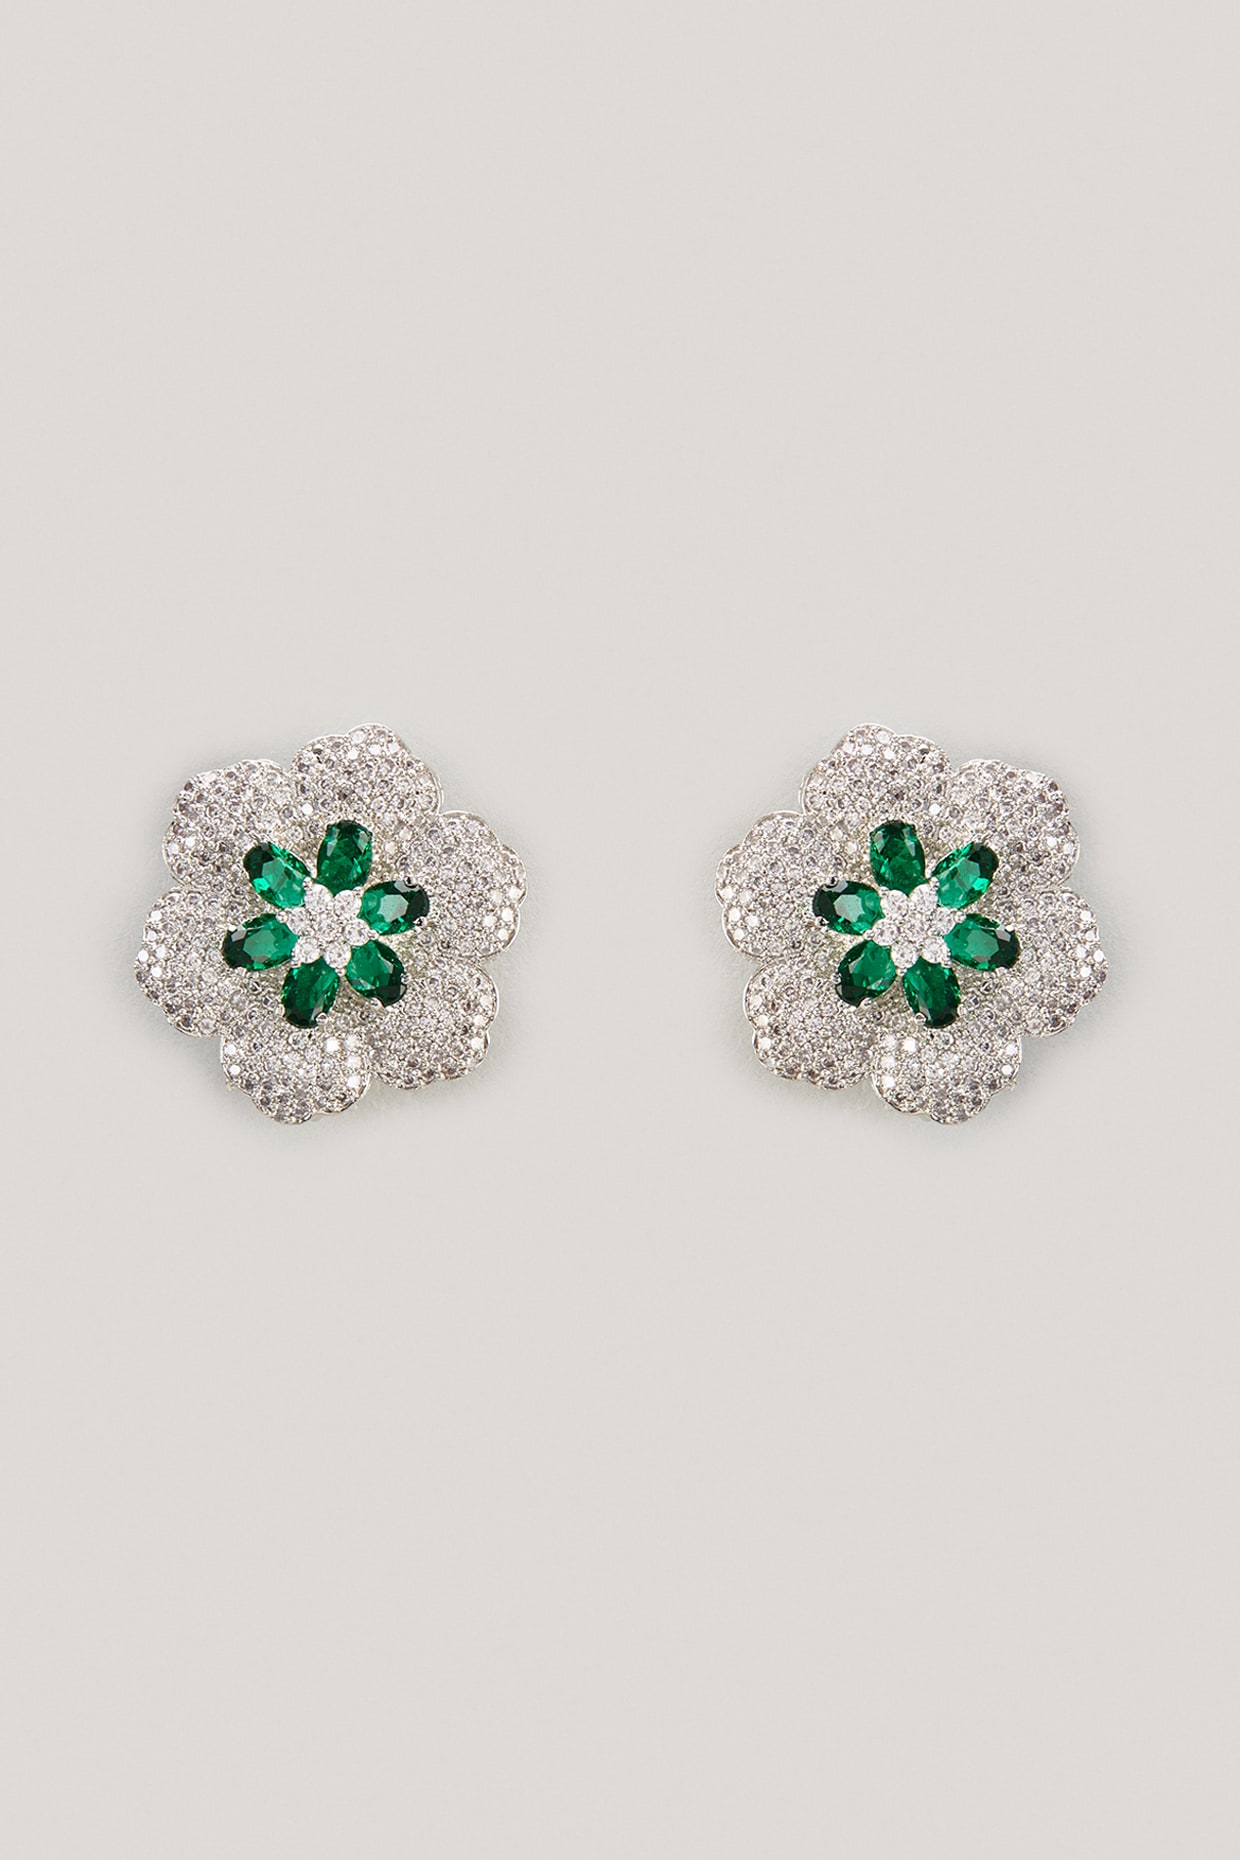 CZ,Emerald Stones,Oval Flower Design Gold Finished Premium Quality Stud  Earrings Buy Online